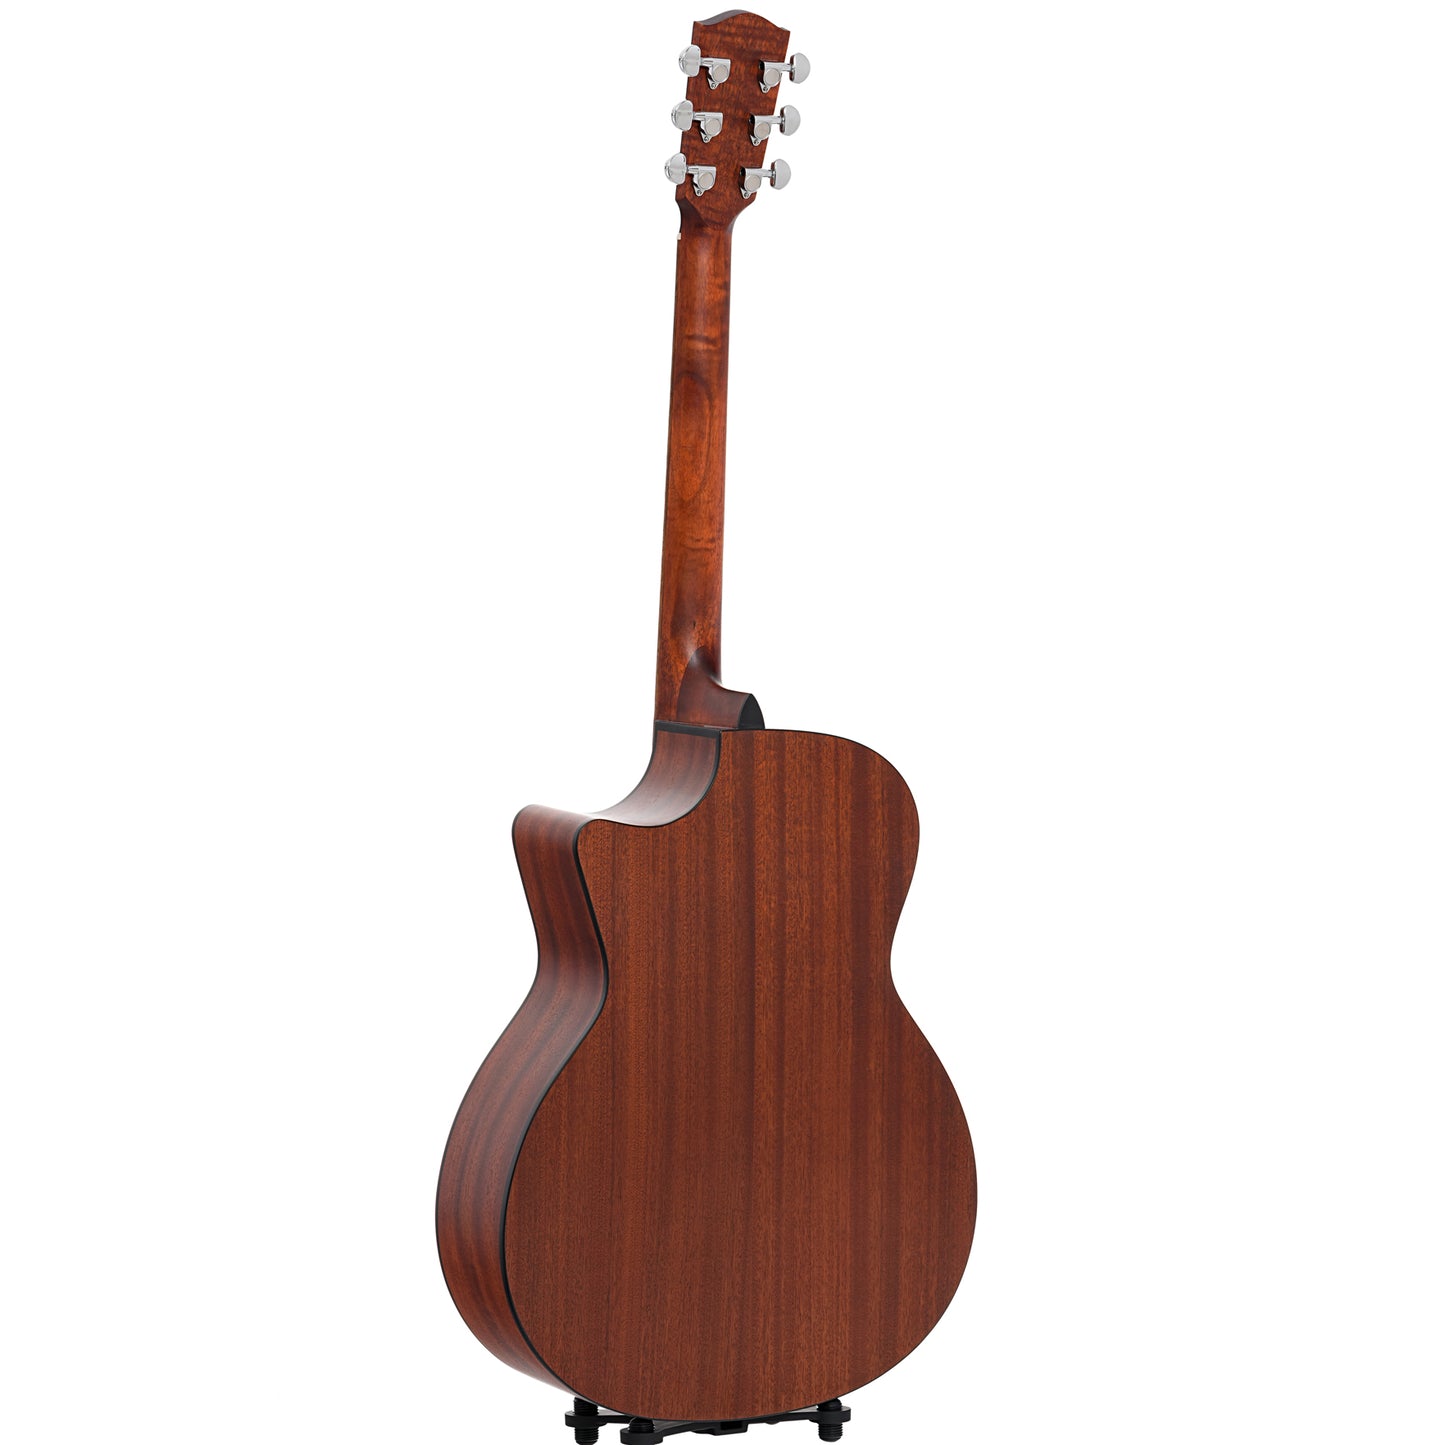 Eastman PCH1-Gace "Pacific Coast Highway" Acoustic Guitar & Gigbag, Classic Stained Finish